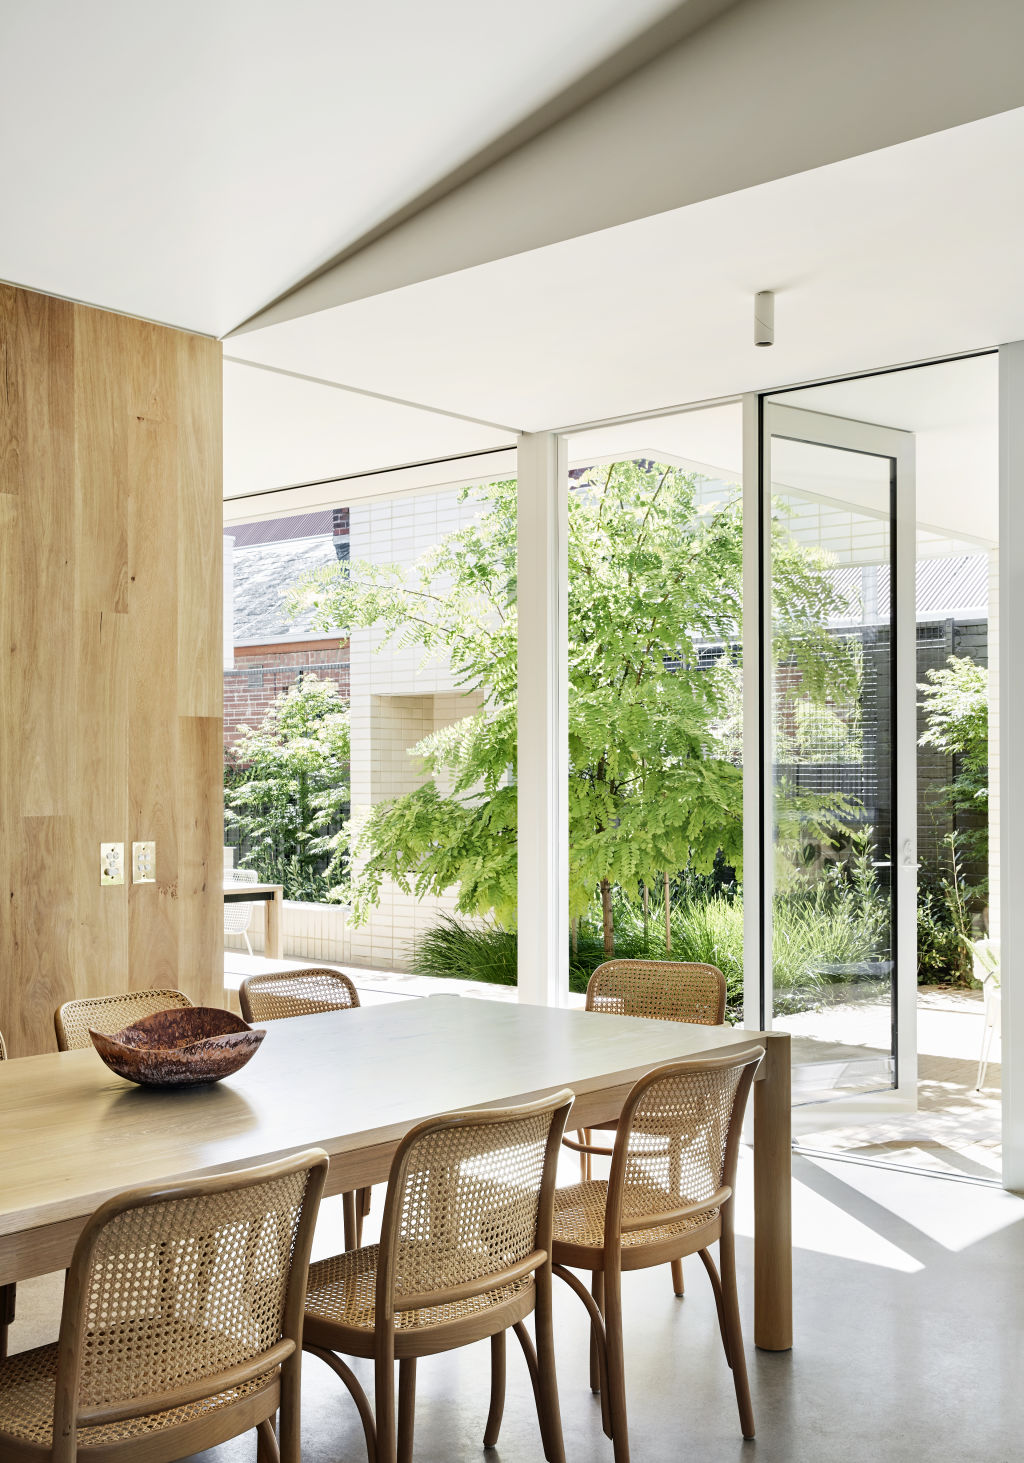 Garden Room House by Clare Cousins. Photo: Tess Kelly.